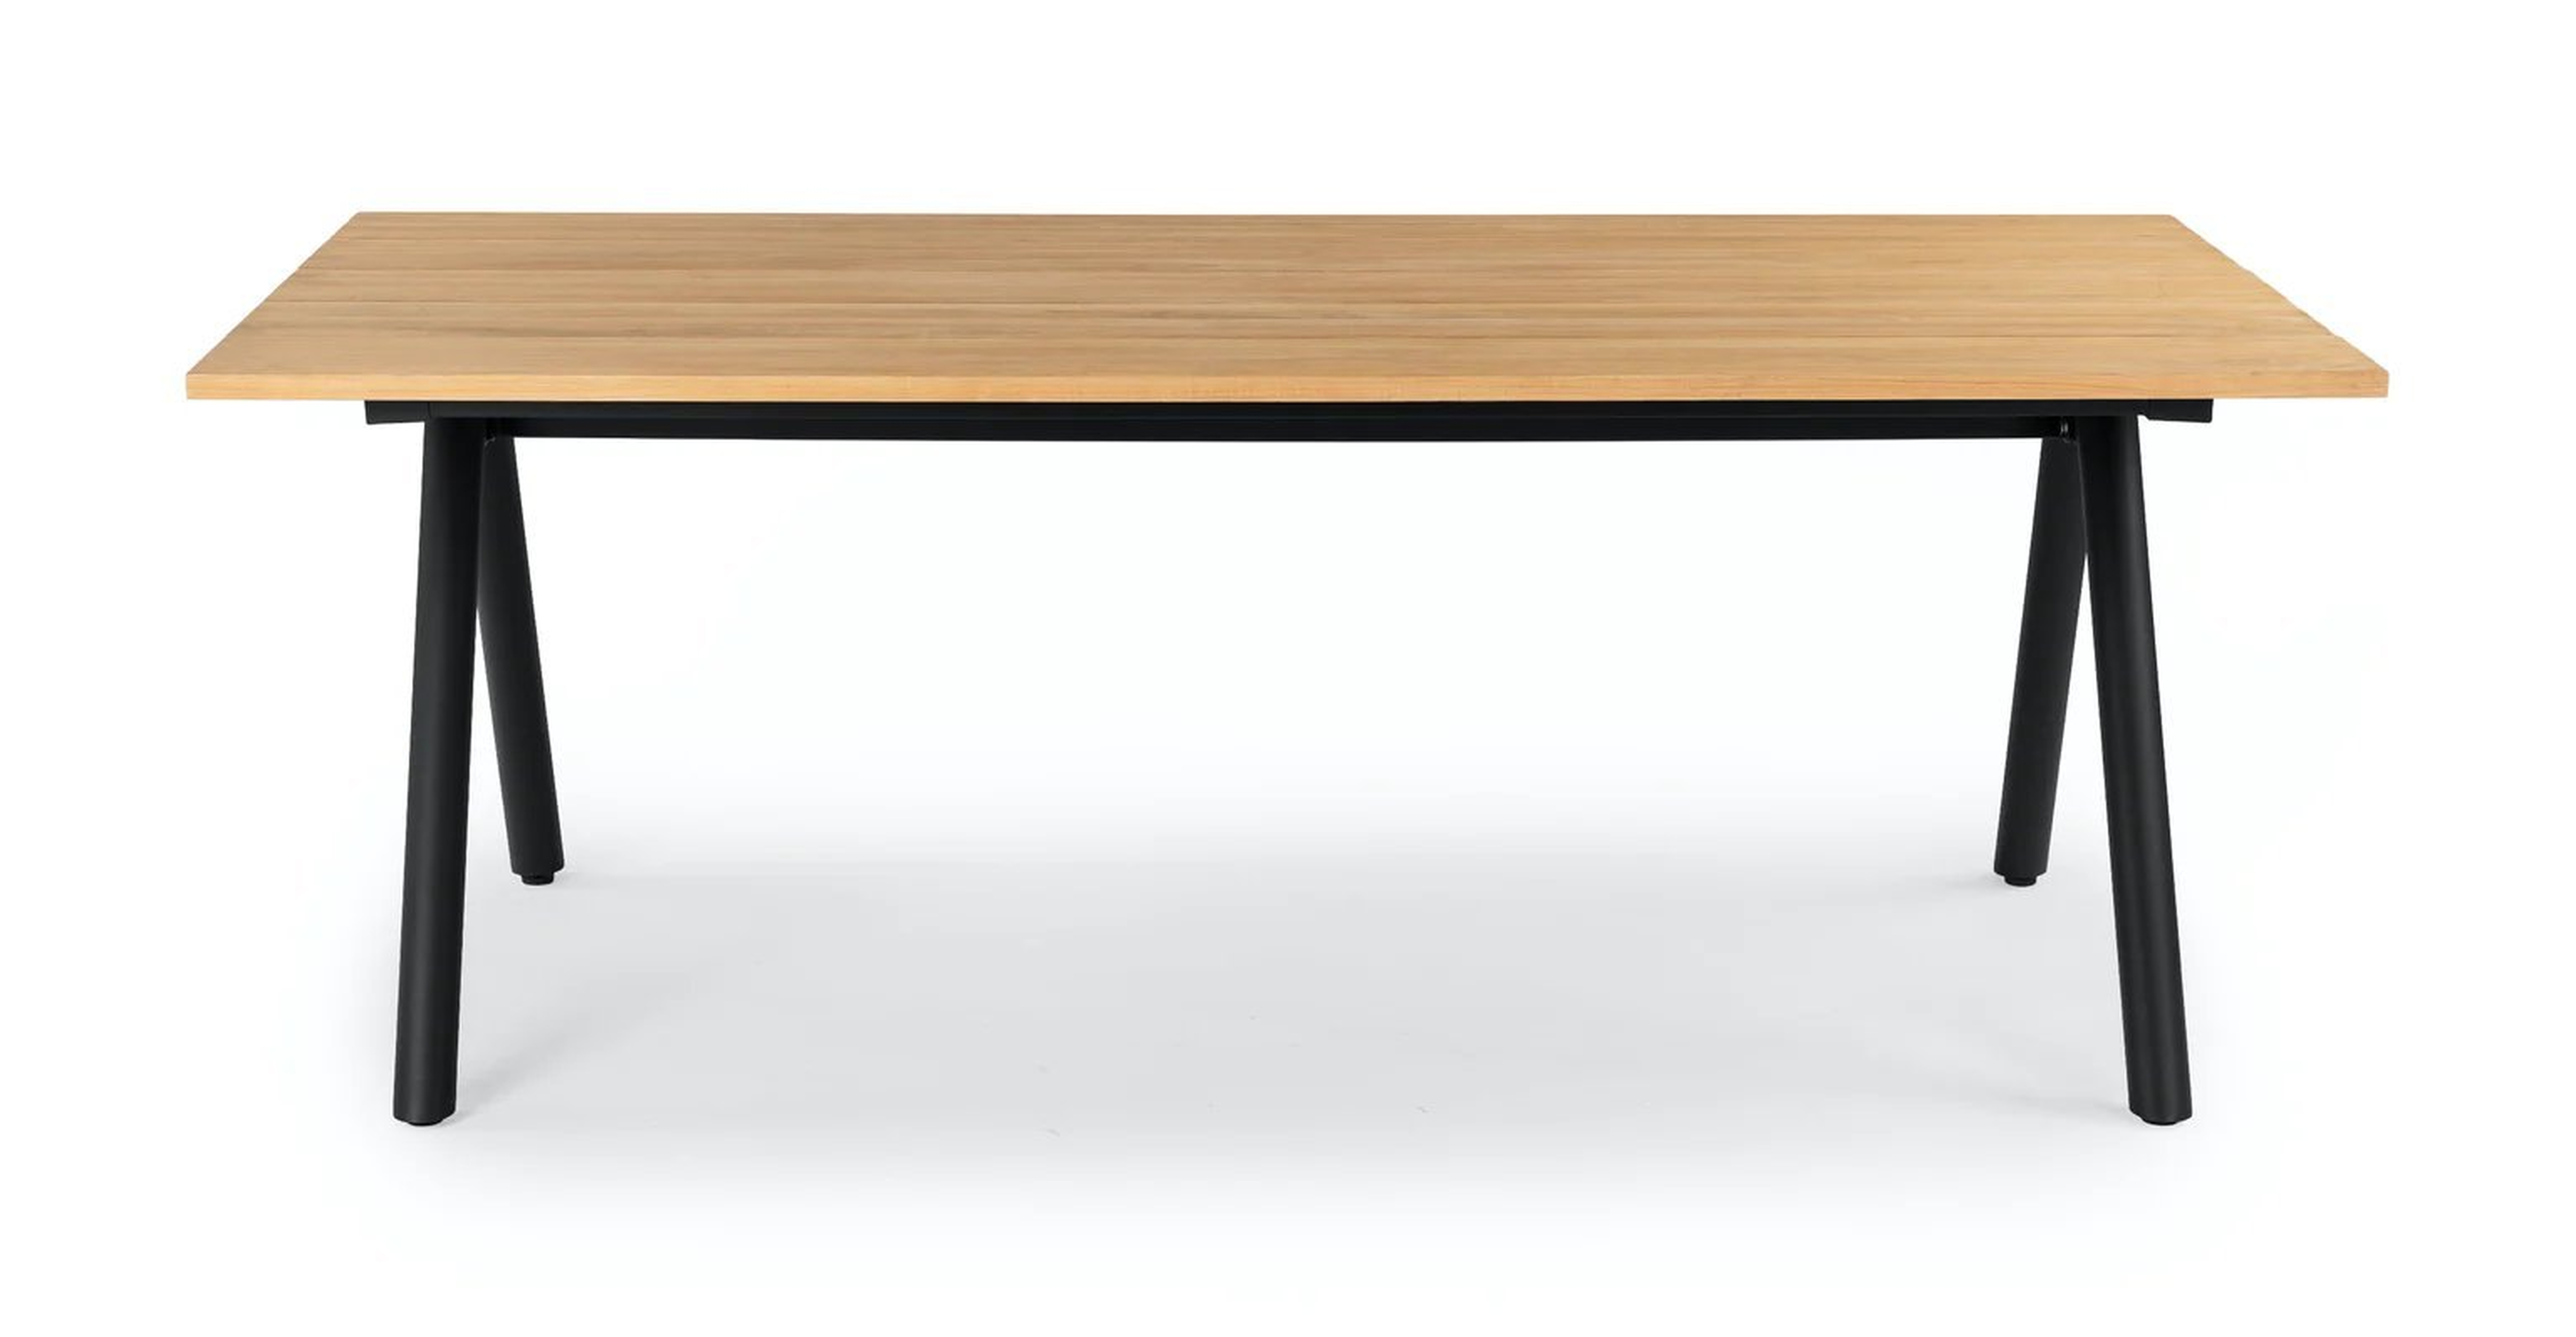 Linden Teak Dining Table - Article